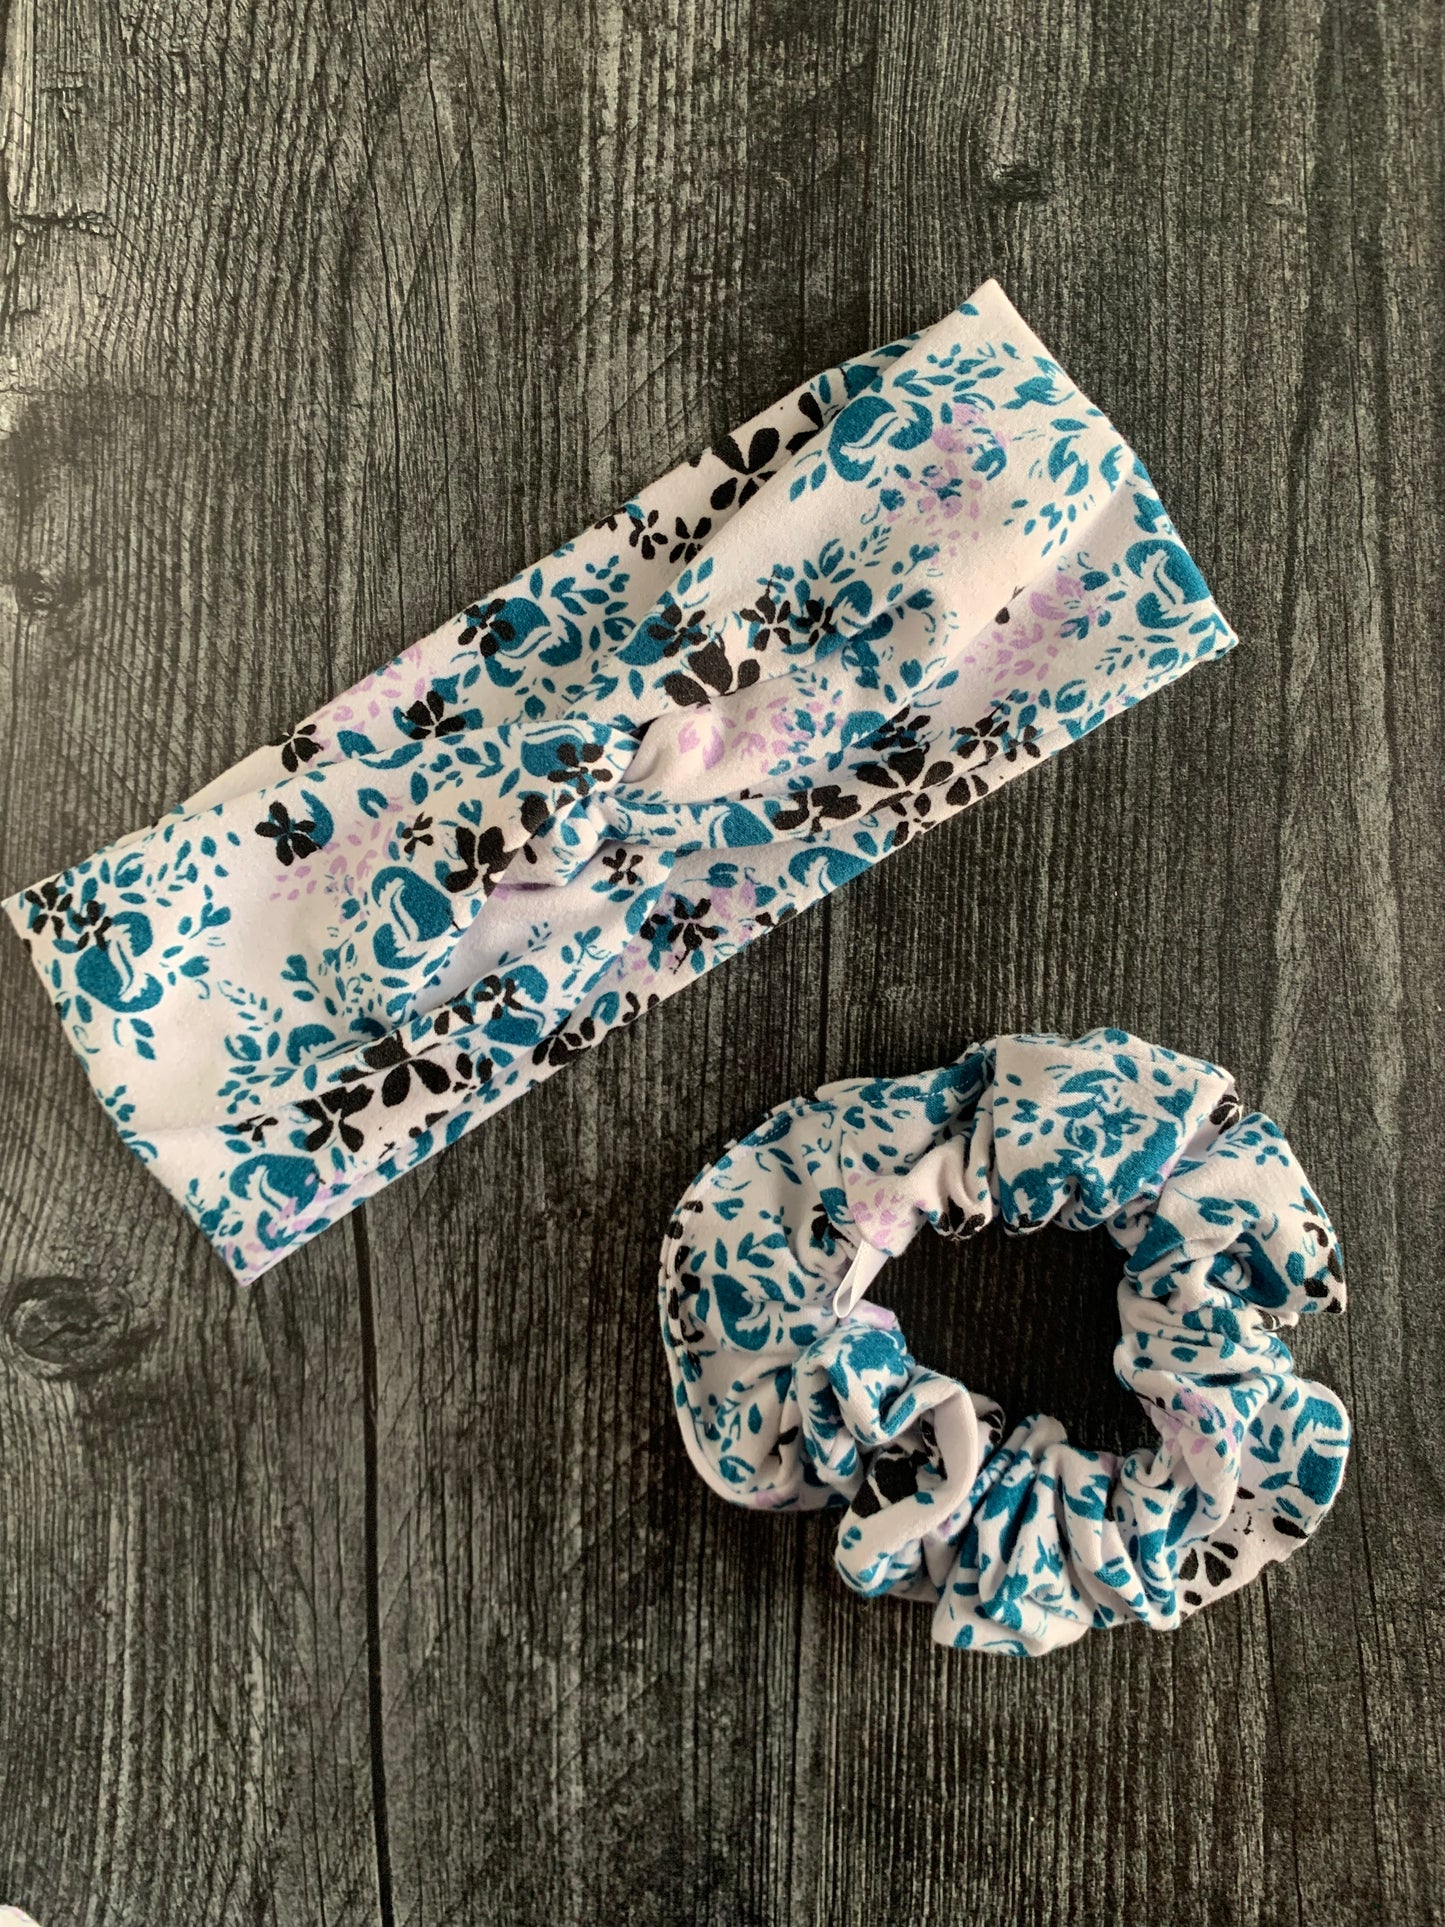 Lilac, Teal, and Black Flowers on White - Knit Scrunchie